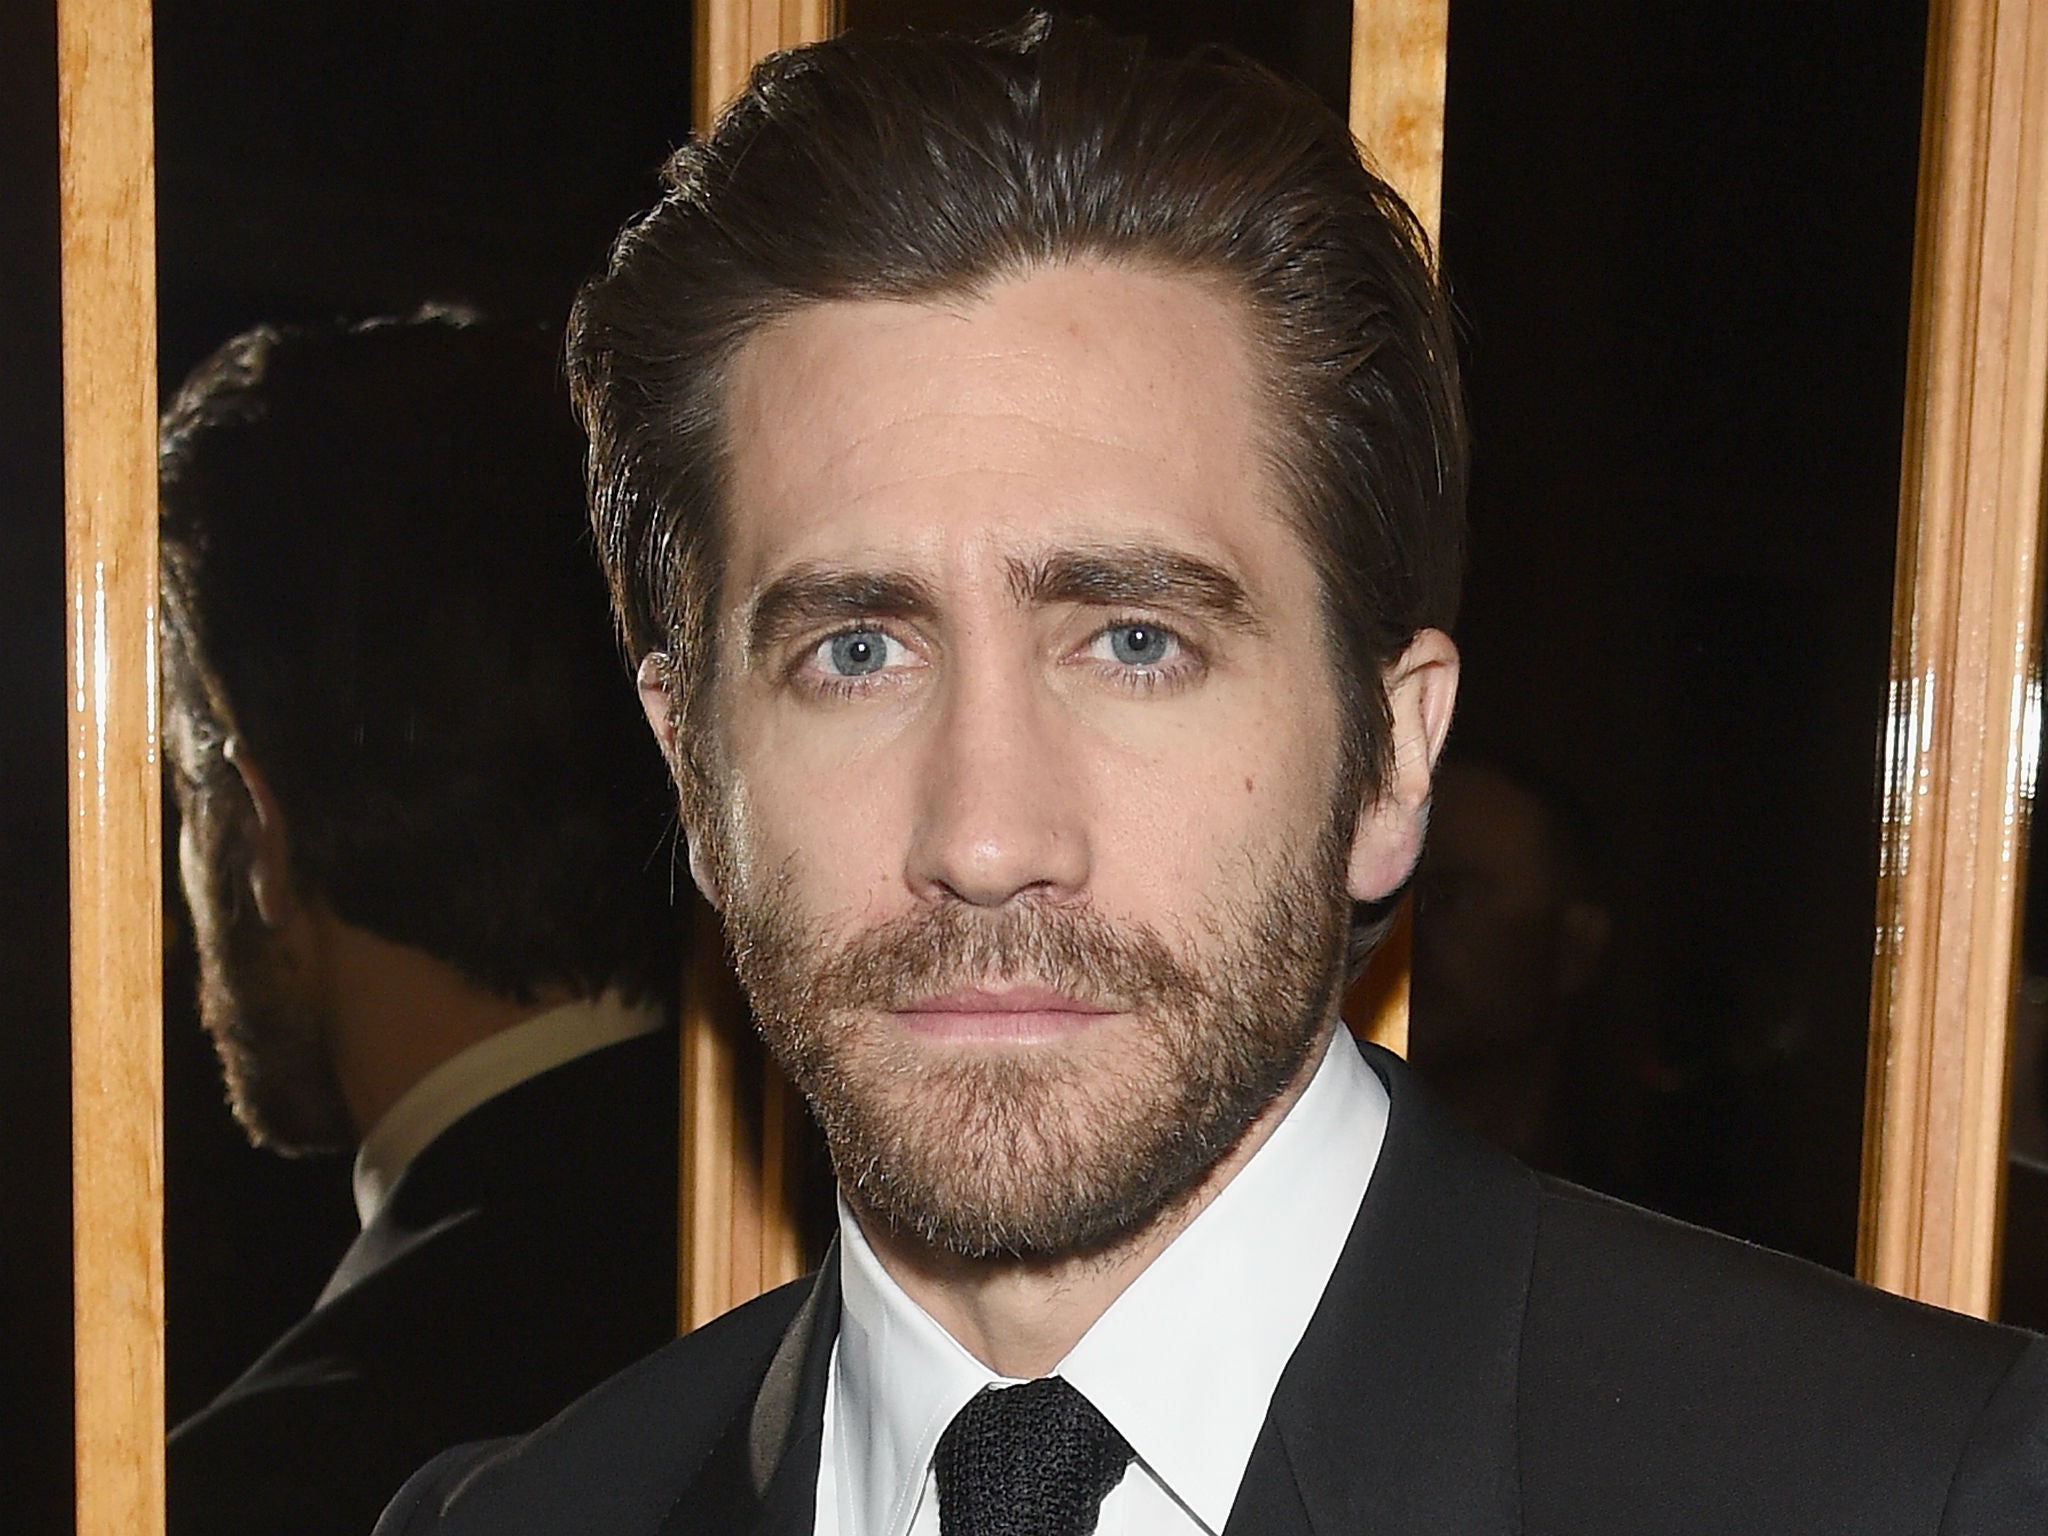 Jake Gyllenhaal also missed out on the roles of Batman and Spider-Man